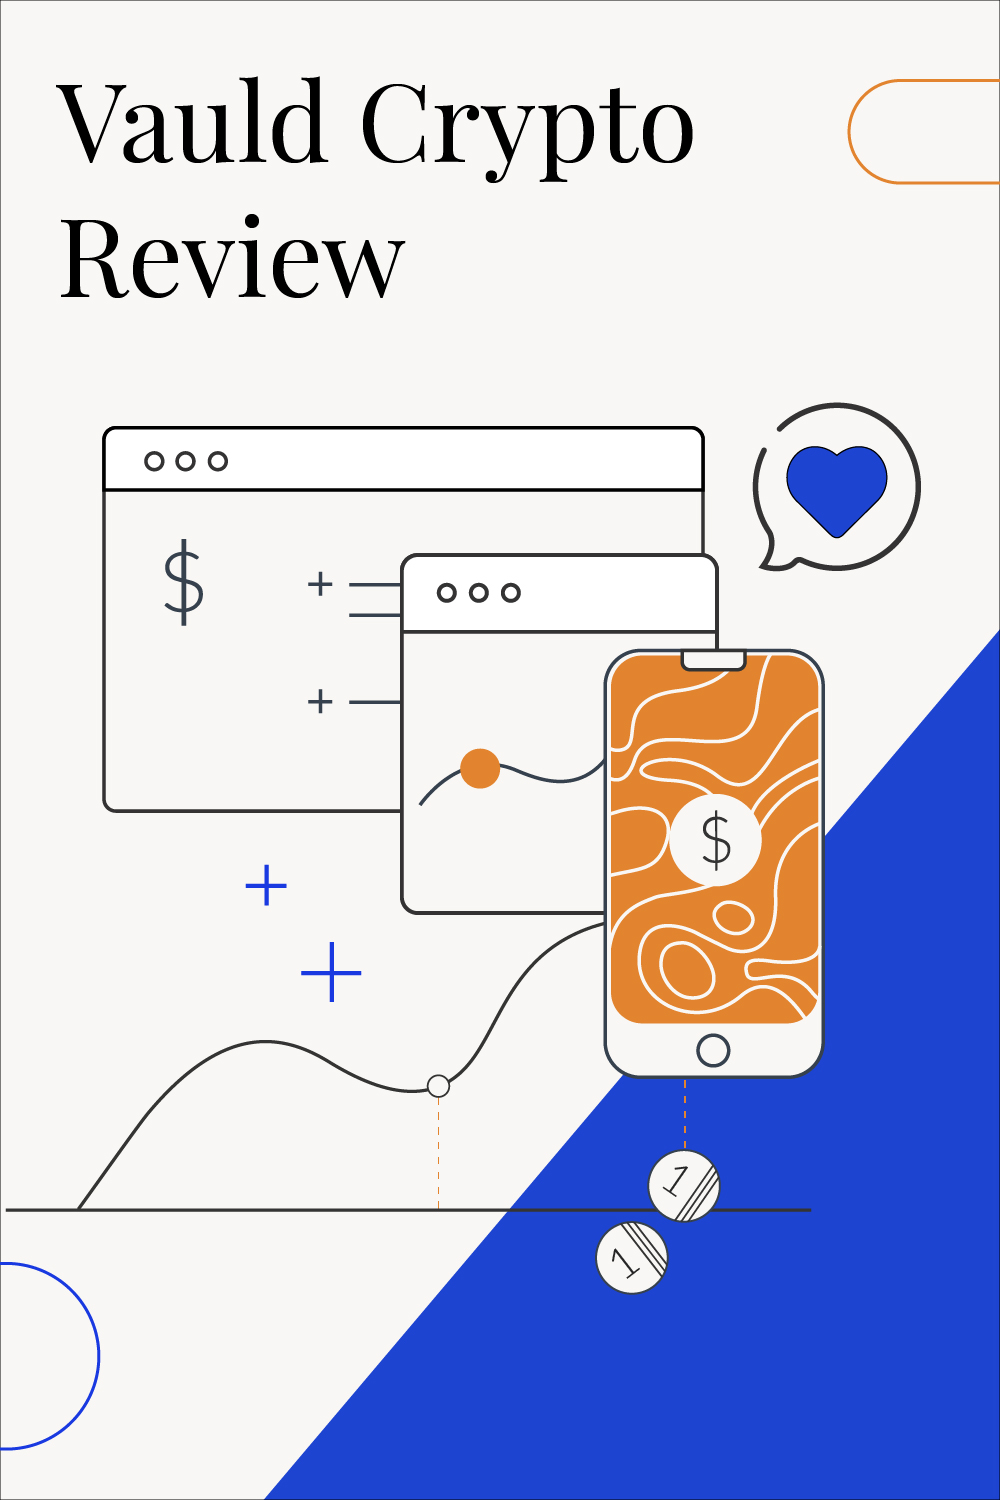 Vauld Crypto Review – Features, Pros & Cons, & Pricing